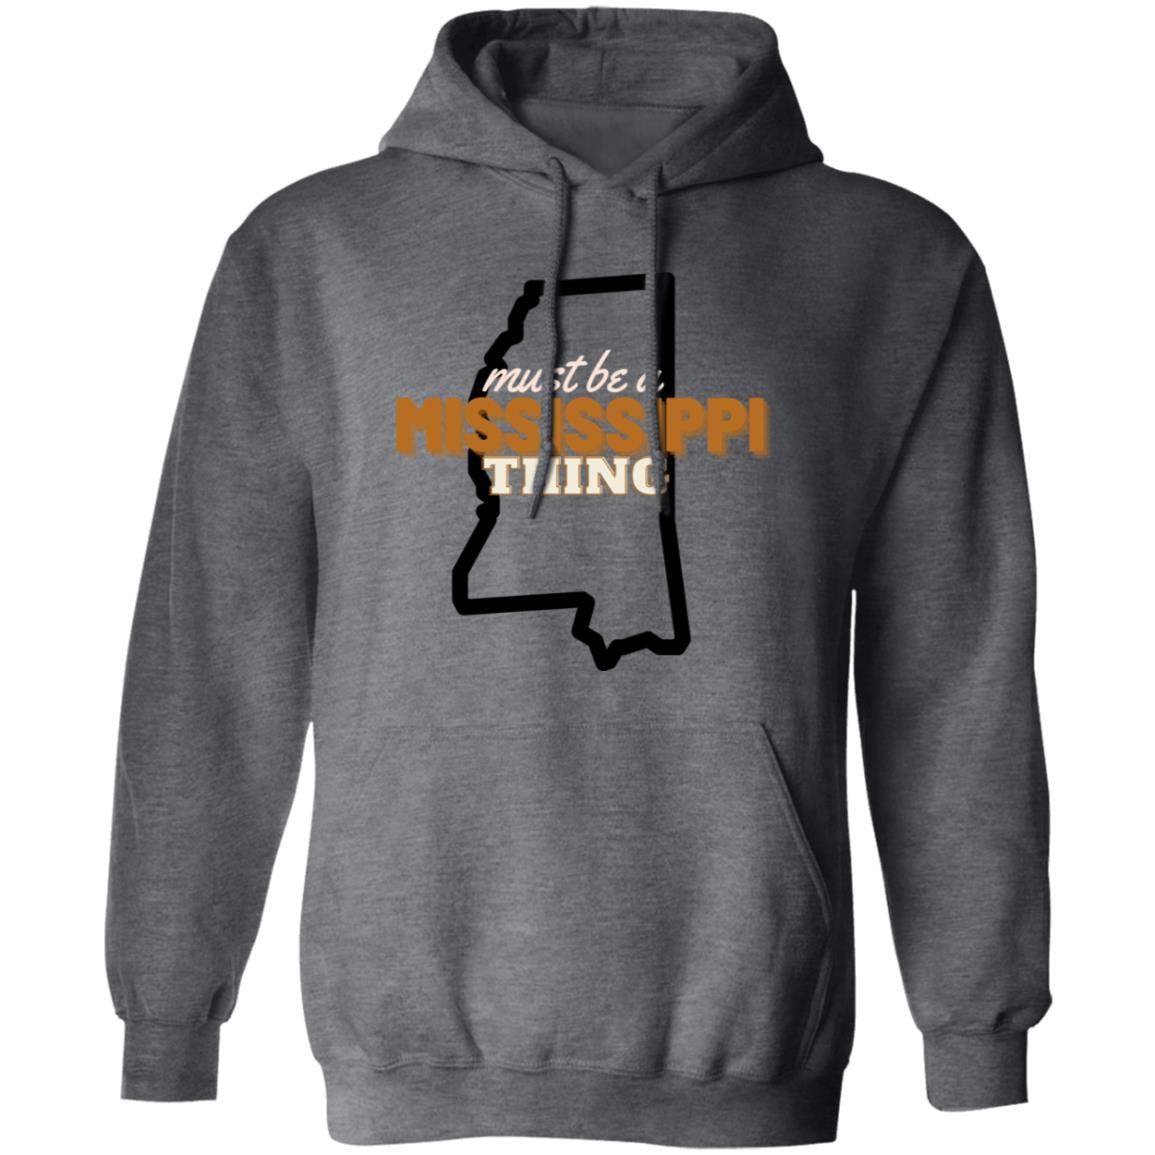 Mississippi G185 Pullover Hoodie (must be a Mississippi thing)